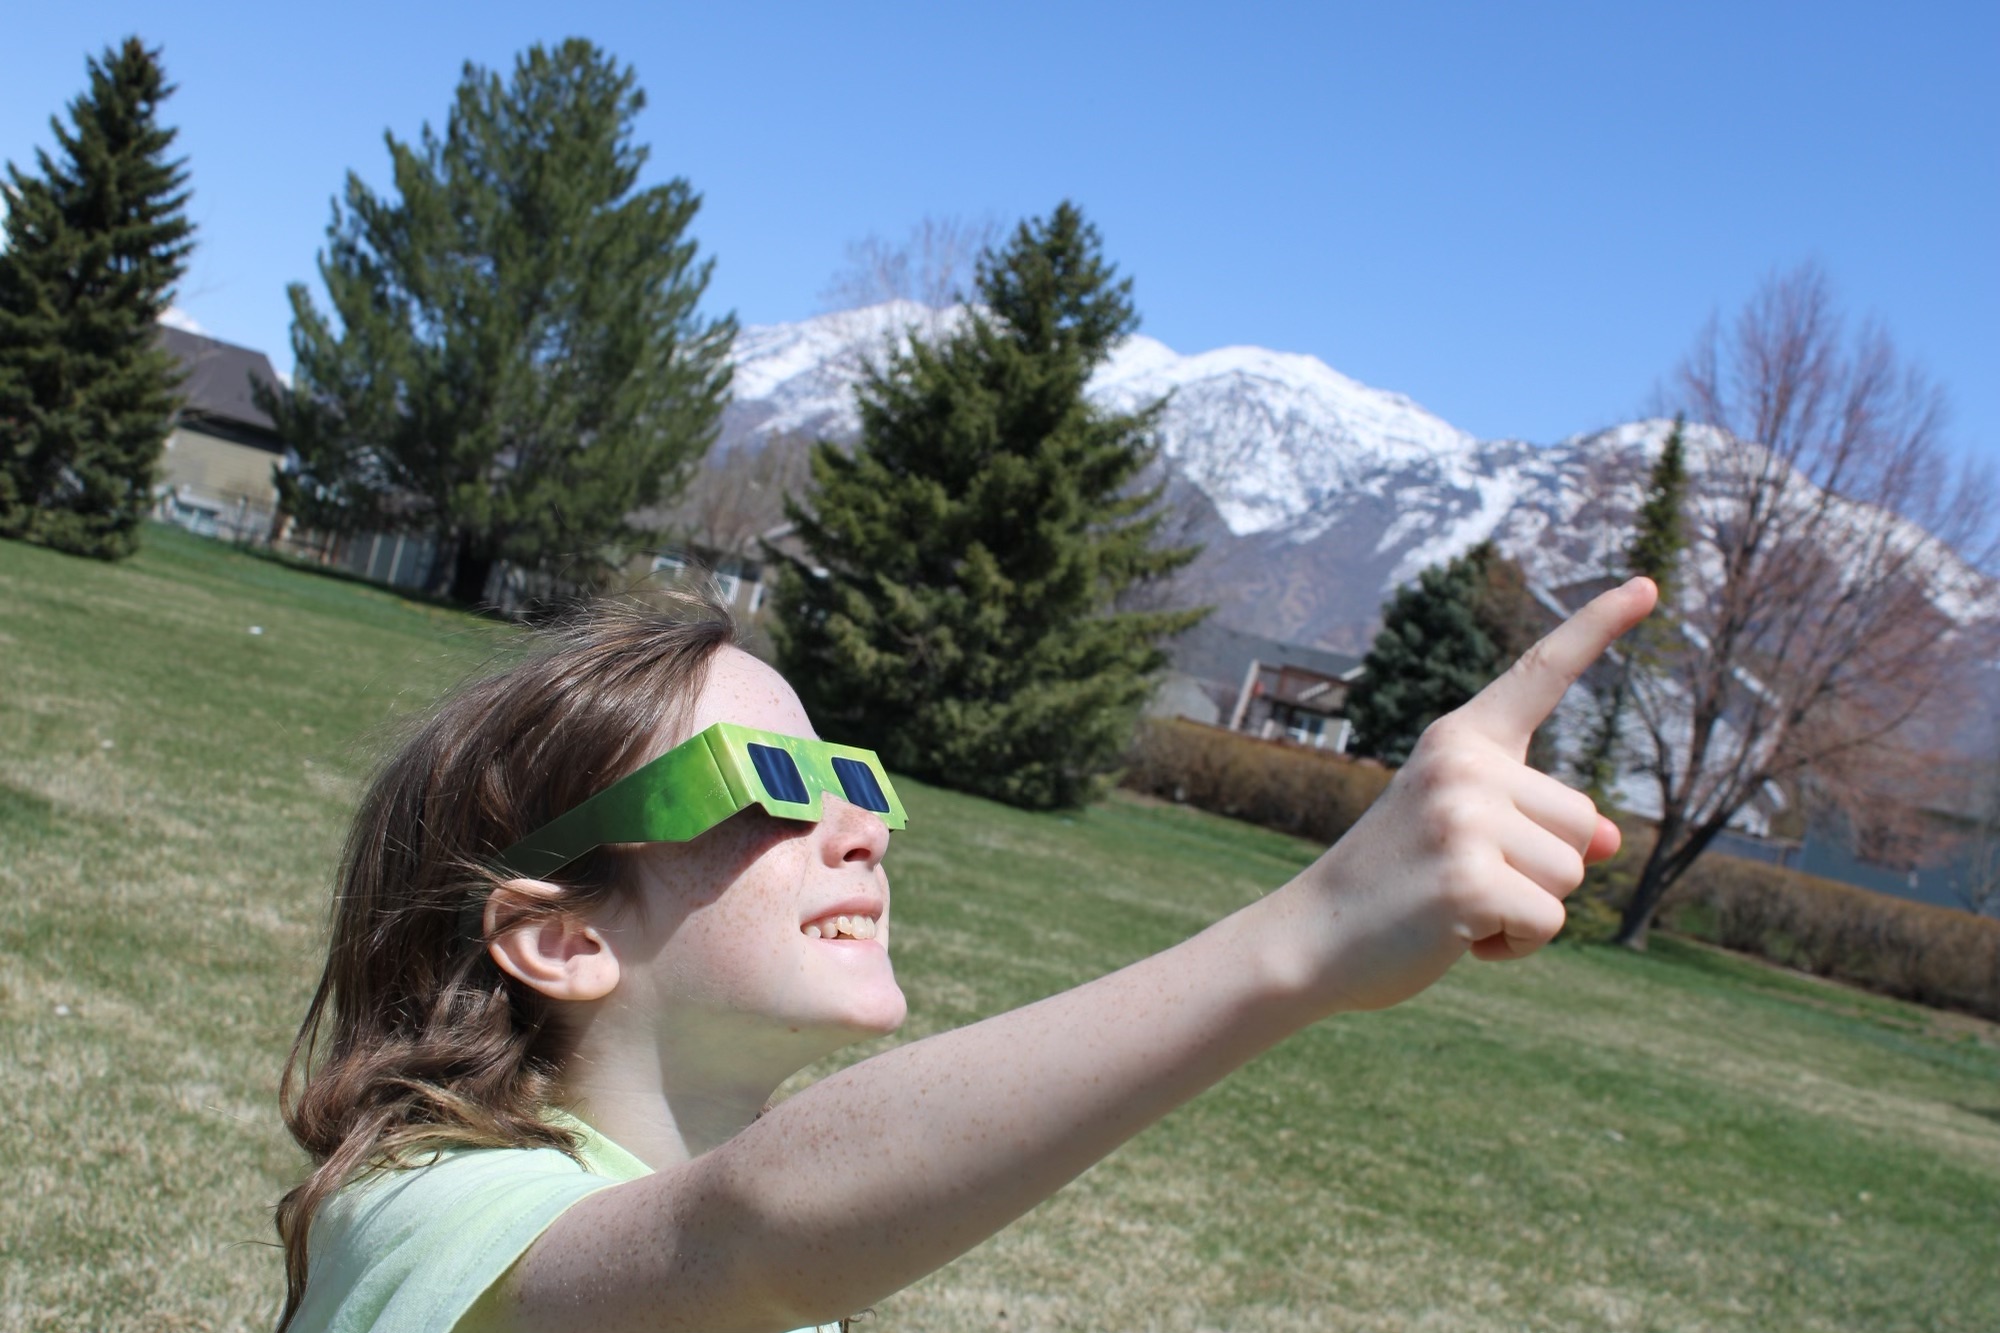 Eclipse Glasses USA Announces Eclipse Glasses Donation Initiative to Support Global Education